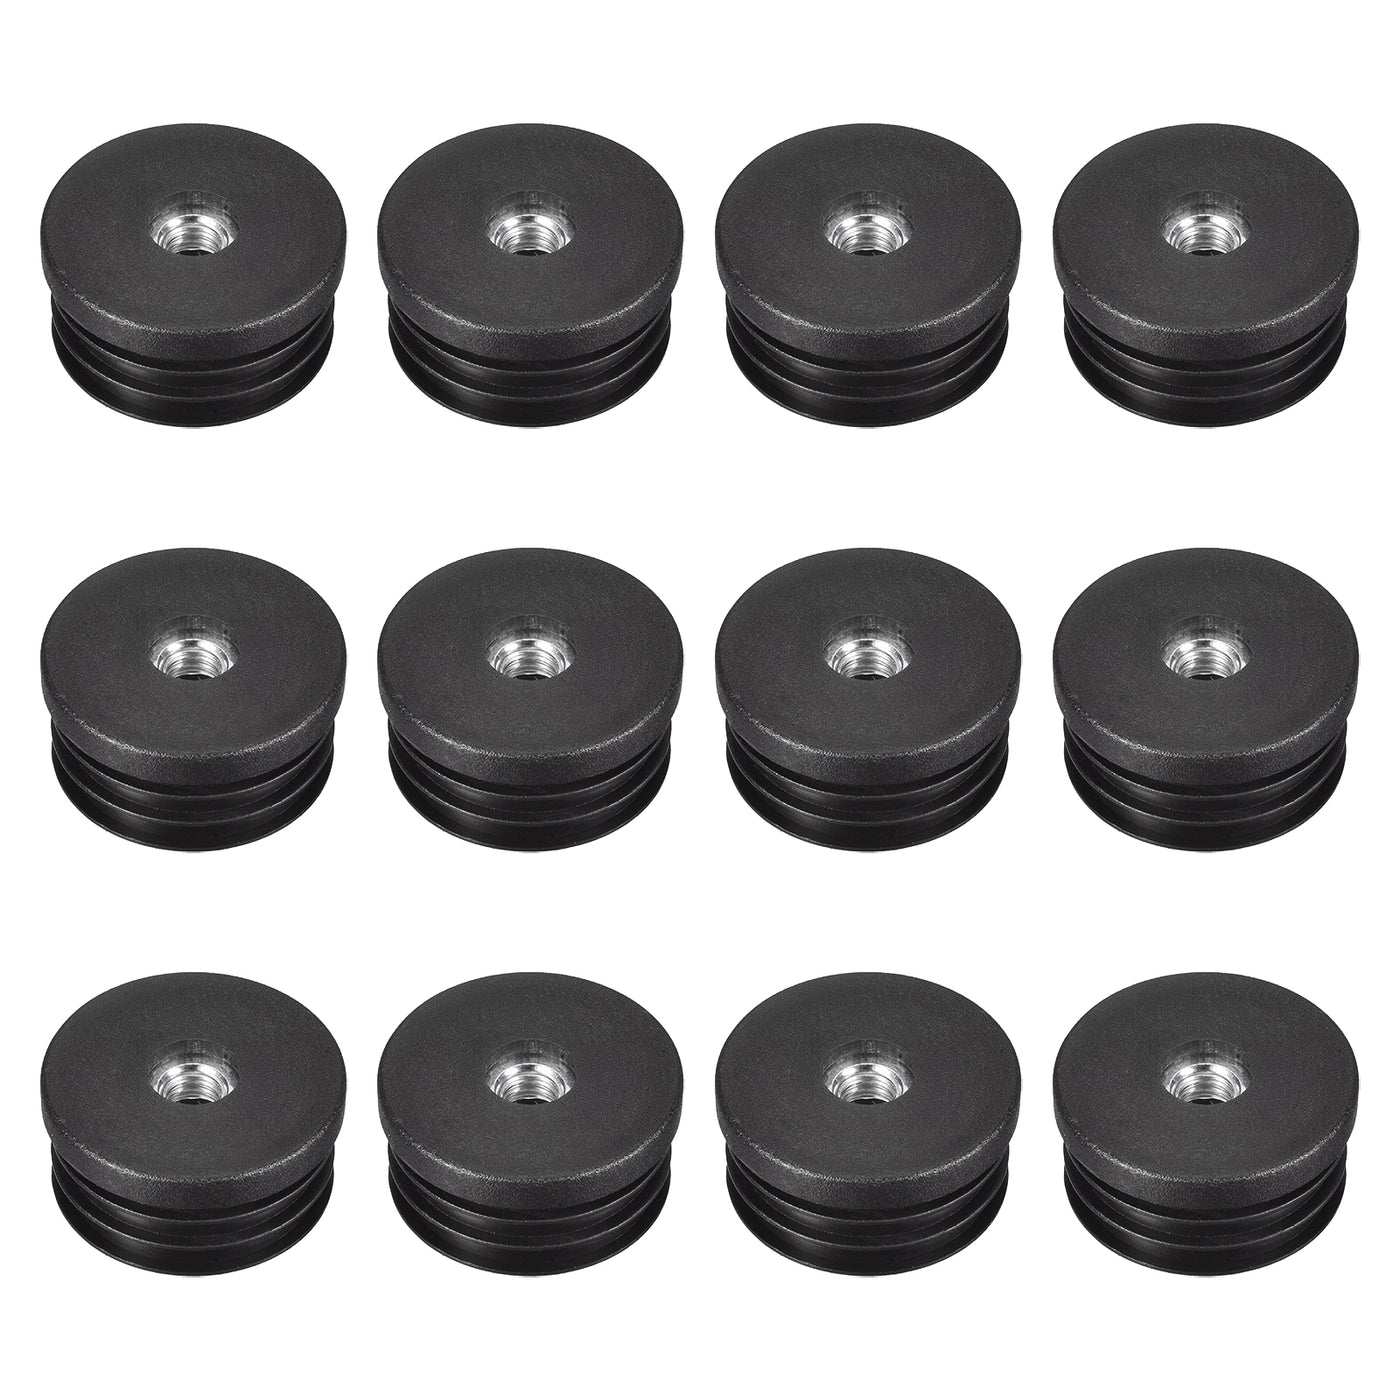 uxcell Uxcell 12Pcs 38mm/1.5" Caster Insert with Thread, Round M8 Thread for Furniture